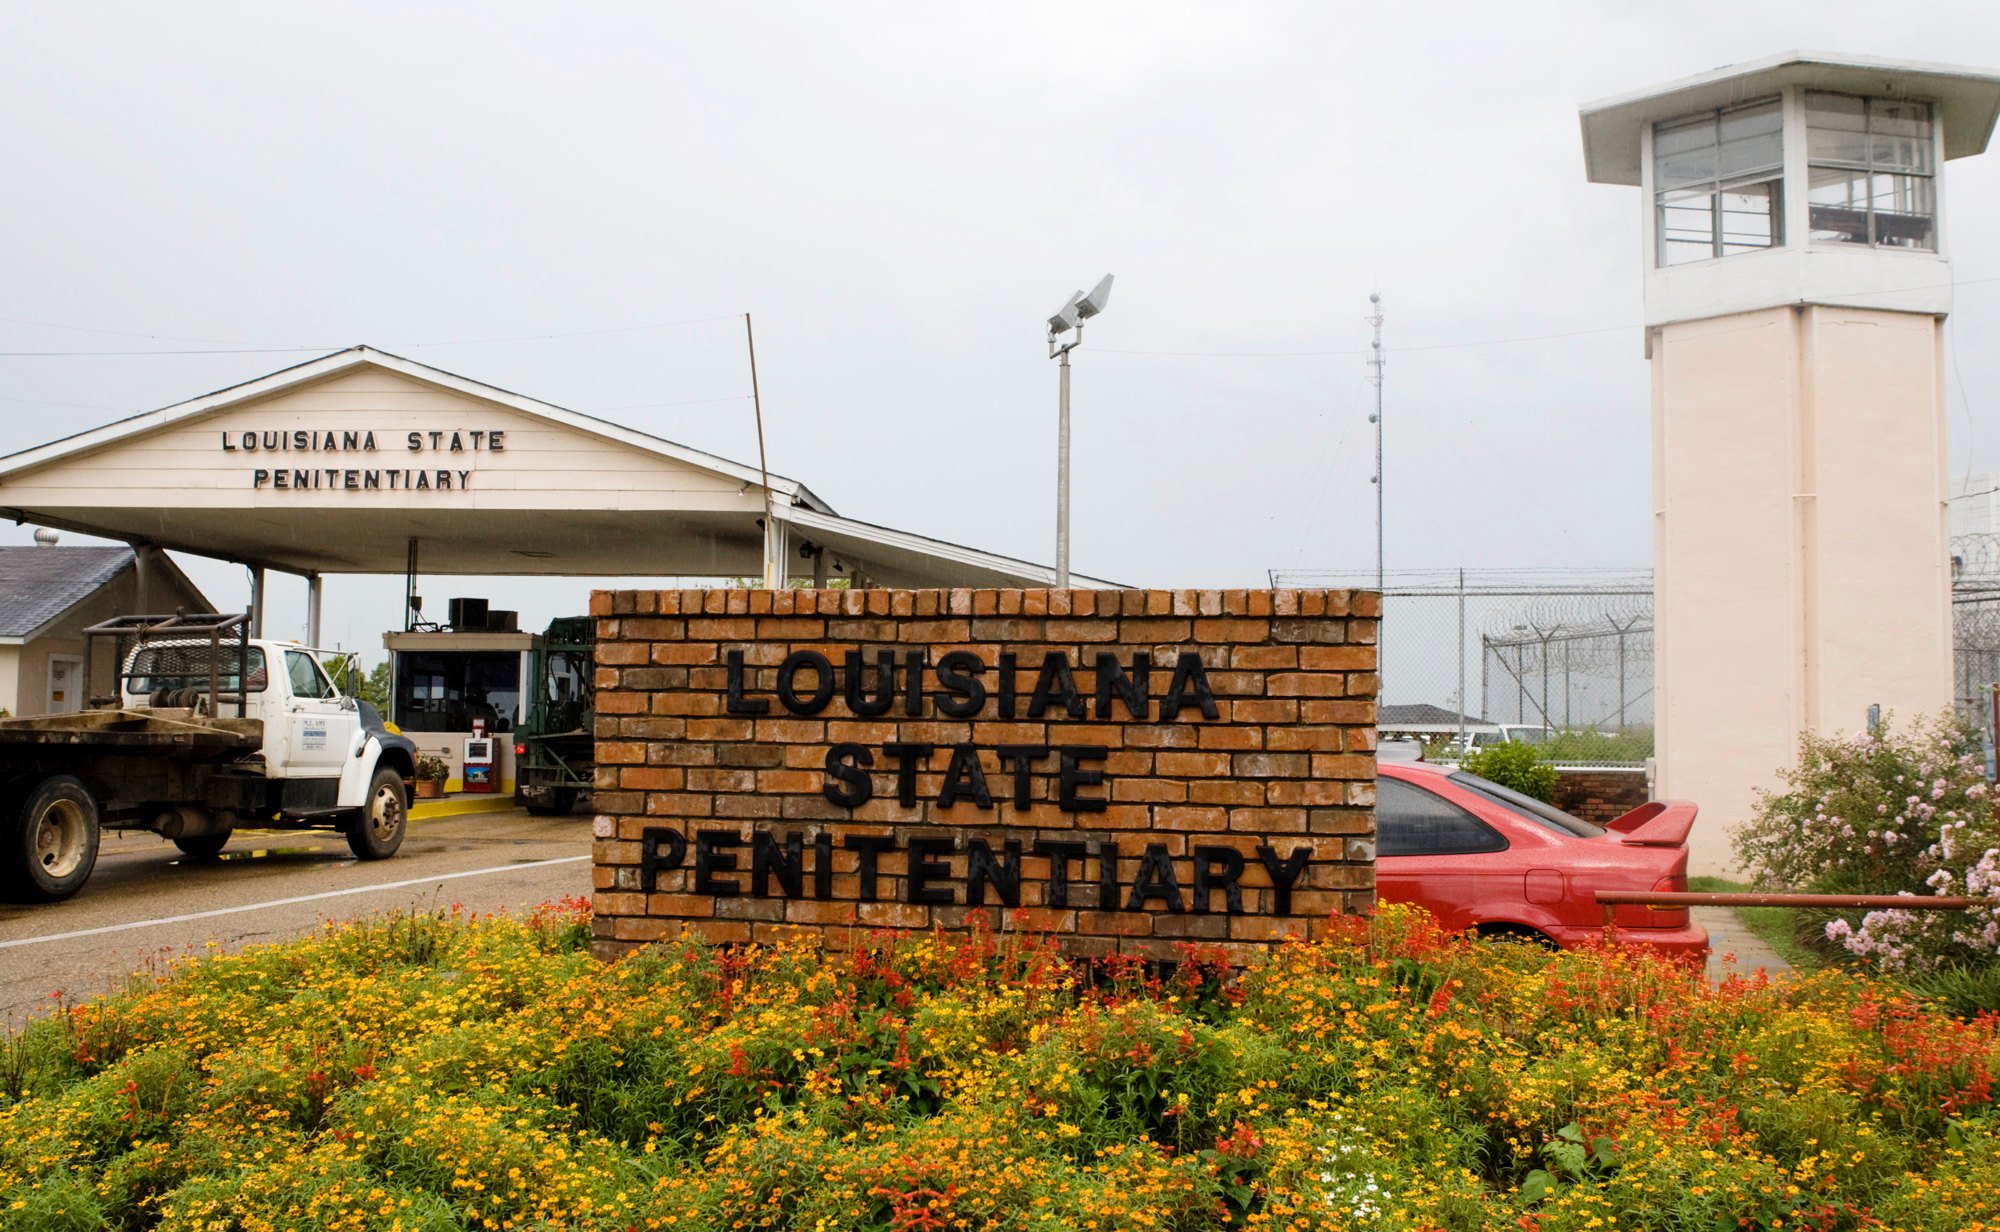 Vehicles enter at the main security gate at the Louisiana State Penitentiary in Angola, Louisiana, in August 2008. Photo: AP